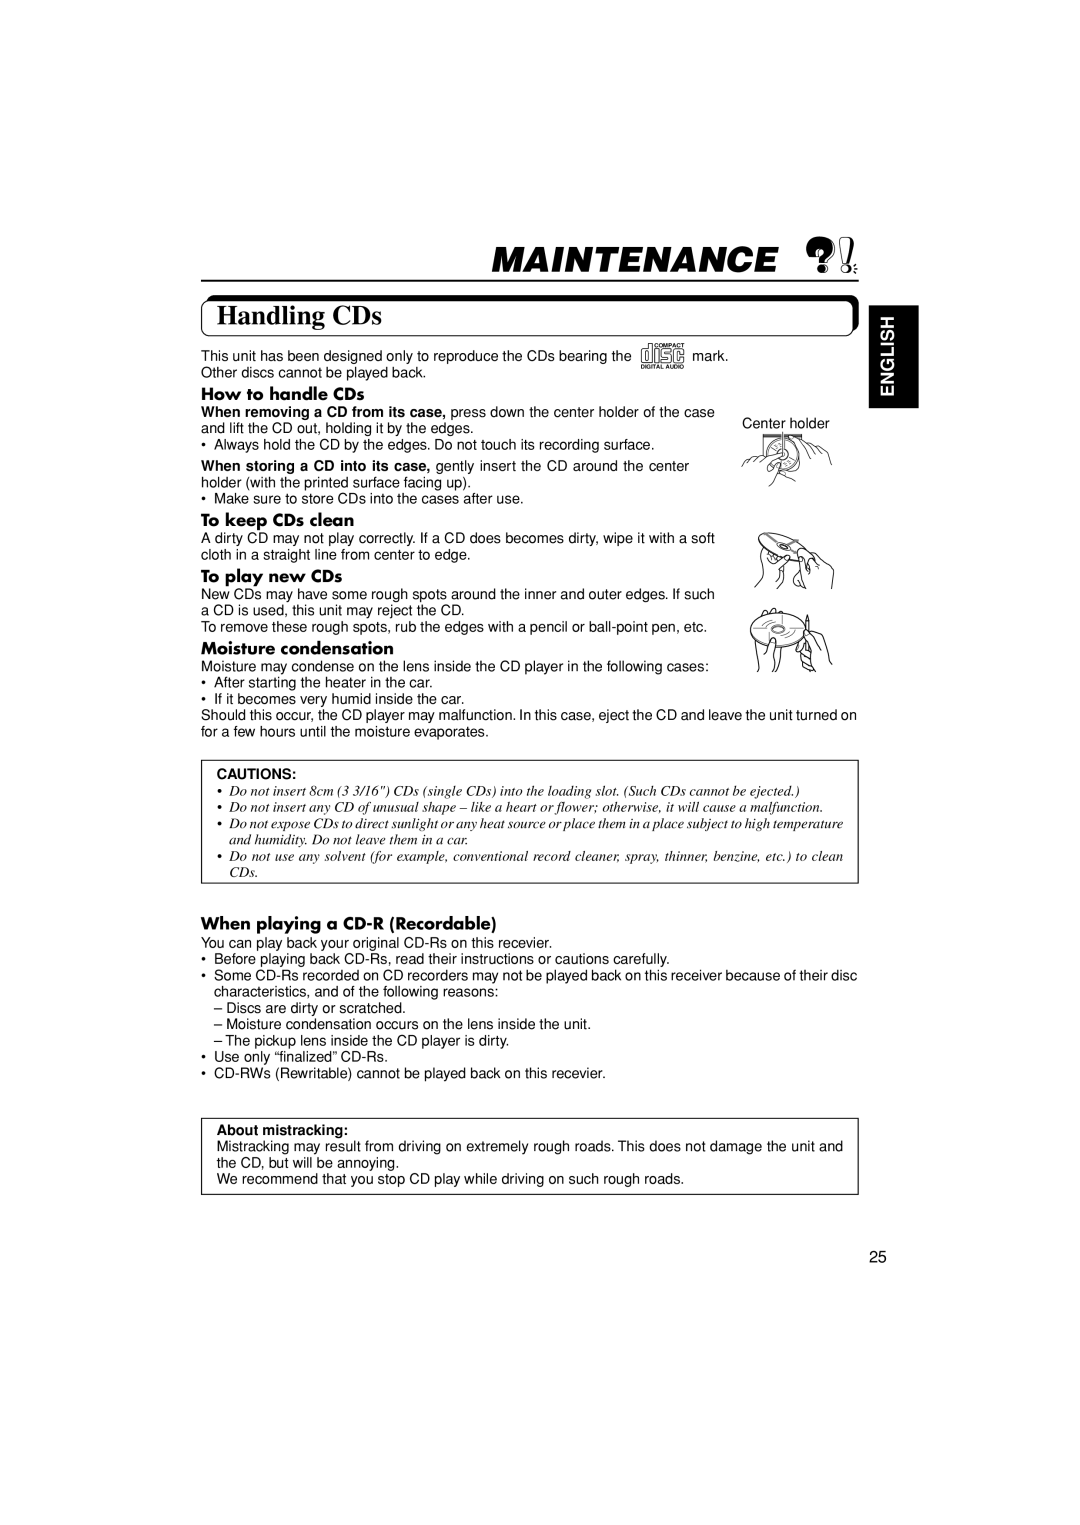 JVC KD-S670 manual Maintenance, Handling CDs, English, How to handle CDs, To keep CDs clean, To play new CDs, Cautions 